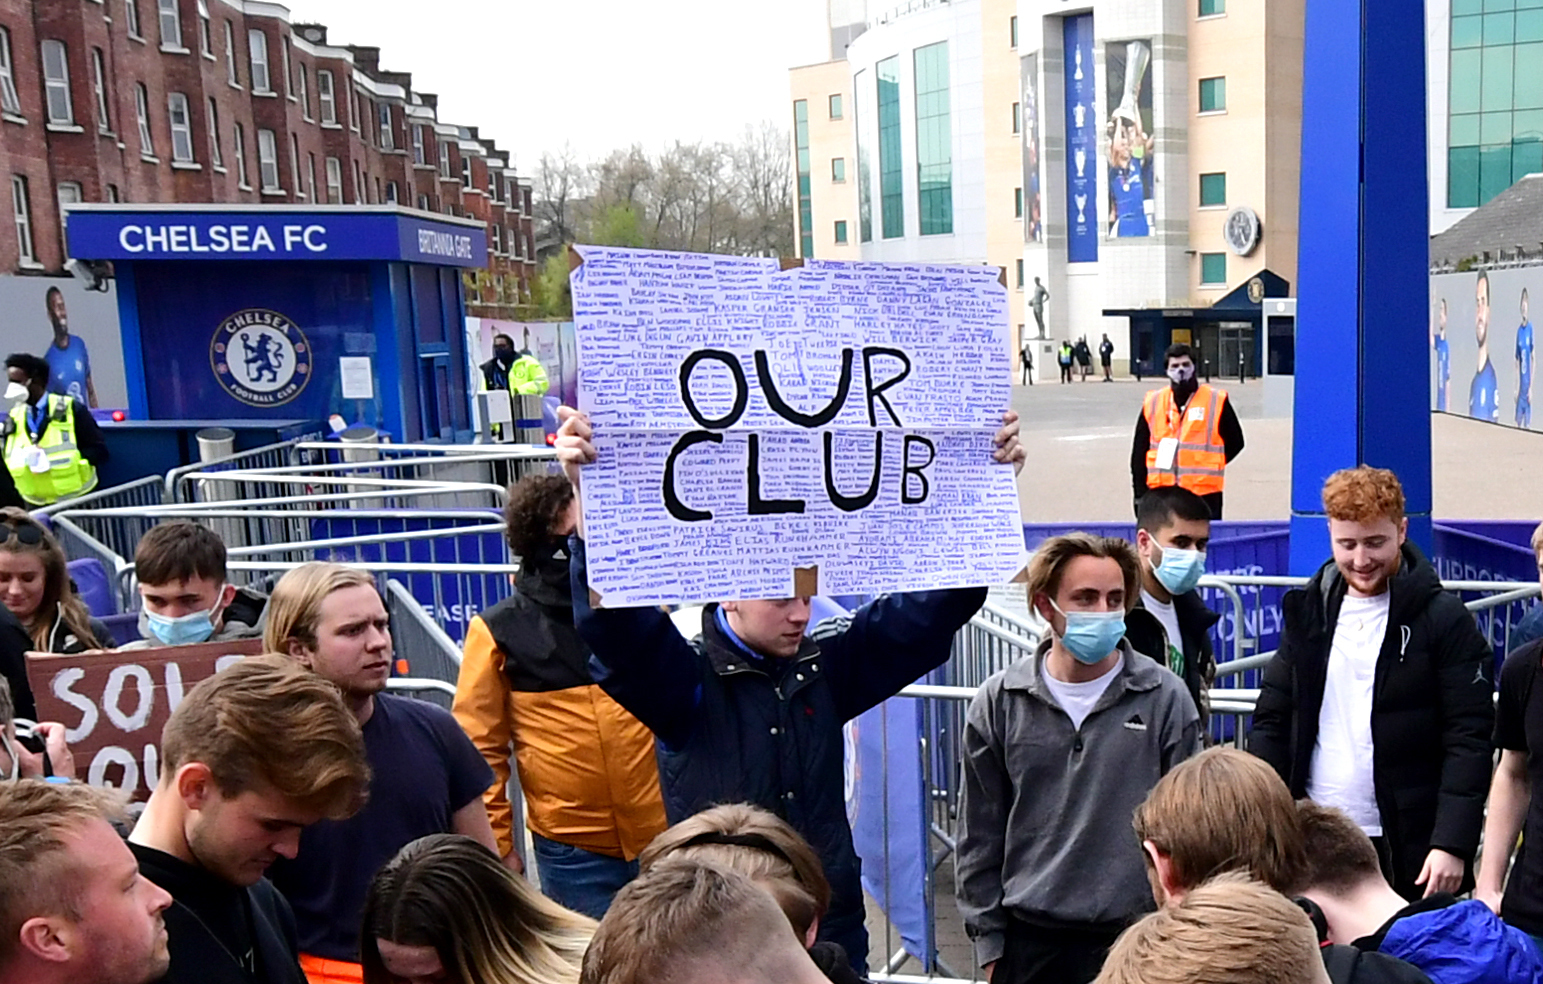 Fans protest against Chelseas involvement in the European Super League. The club has since withdrawn along with the five other English sides involved. Credit: PA